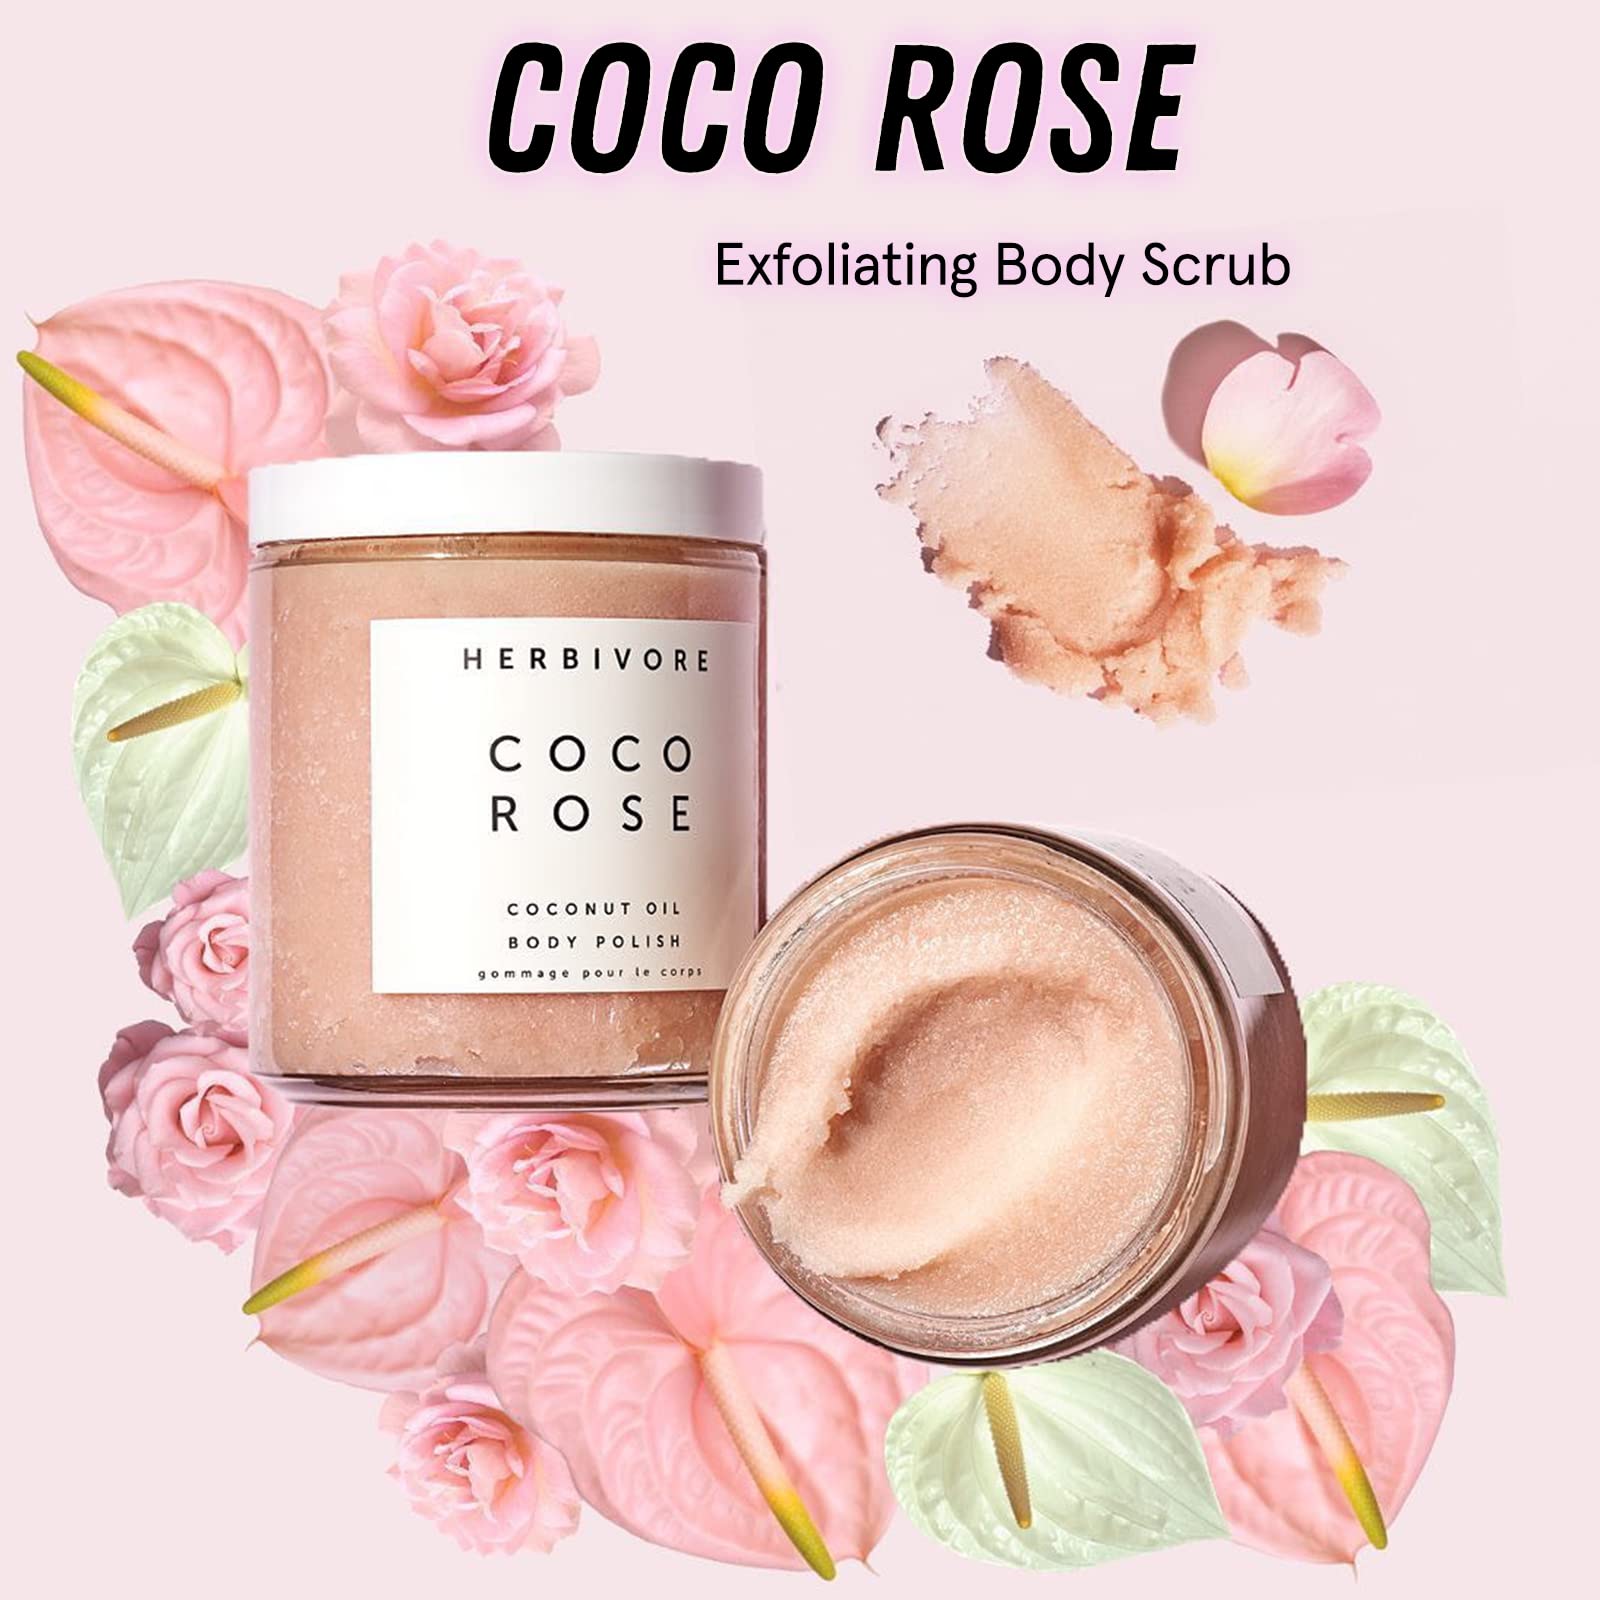 HERBIVORE Coco Rose Exfoliating Body Scrub – Cleansing Detox with Pink Clay, Moisturizing Coconut Oil & Shea Butter, Plant-based, Vegan, Cruelty-Free, 8 oz